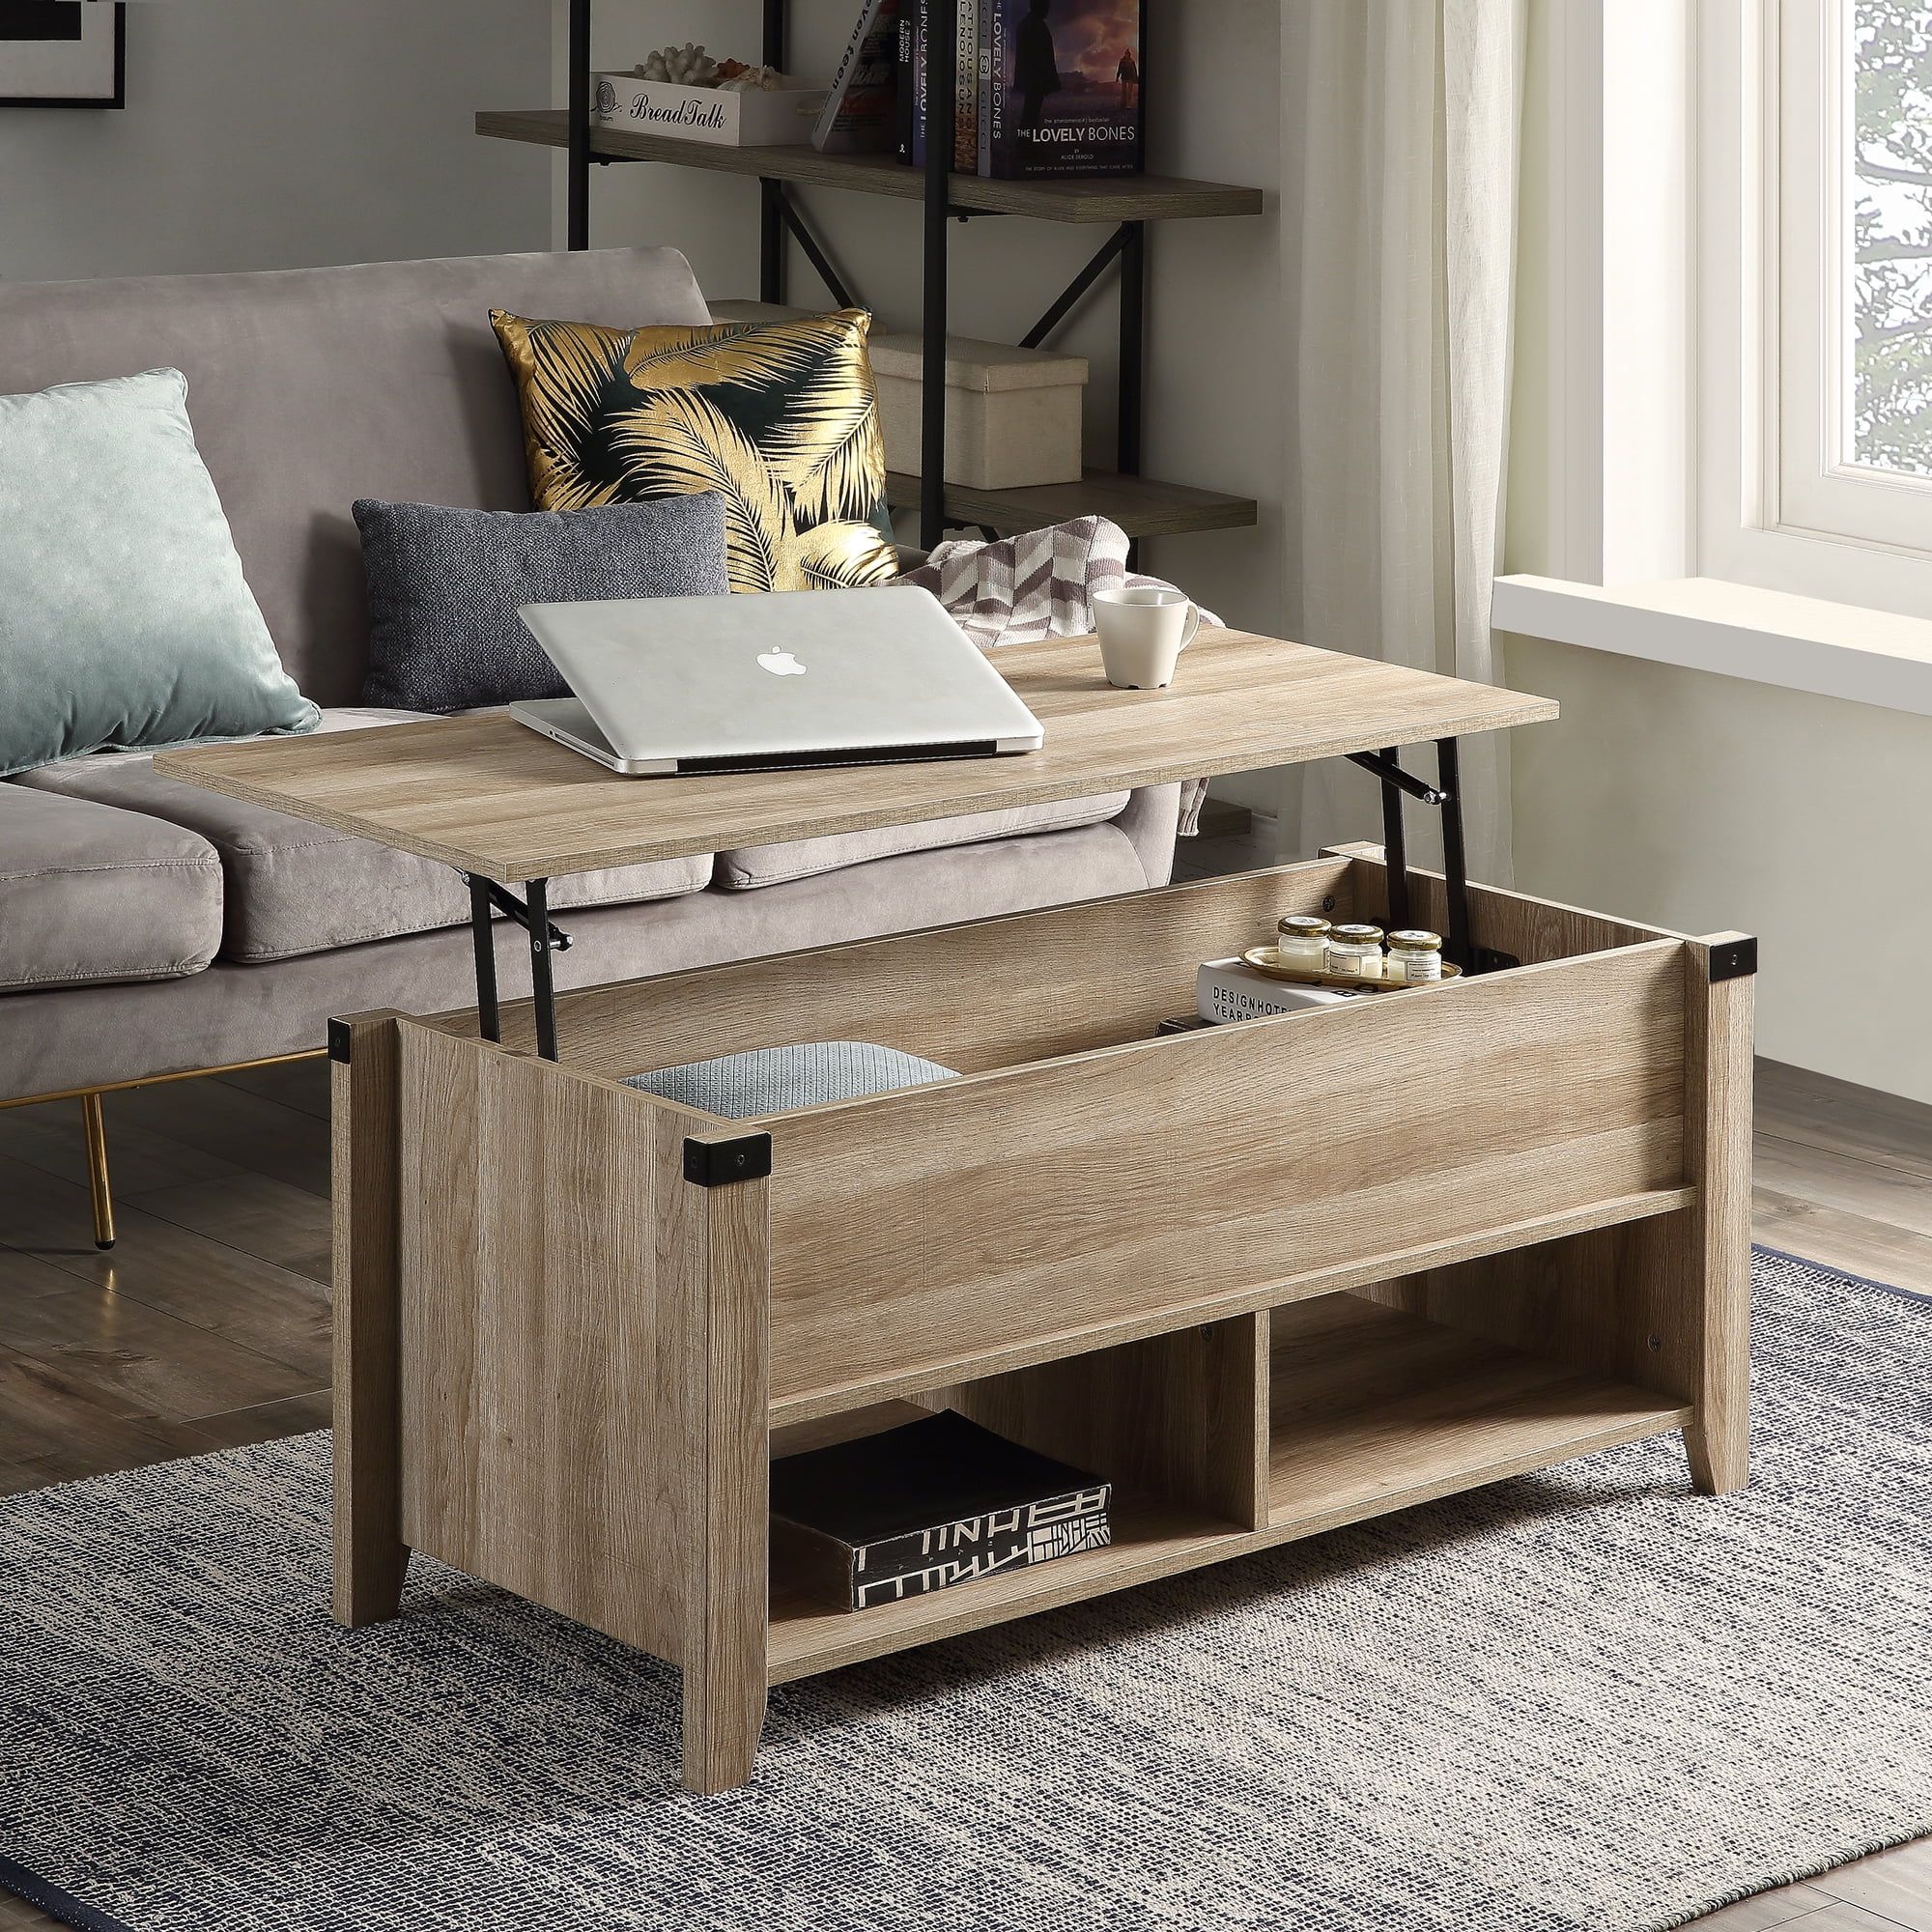 Multipurpose Coffee Table With Drawers ,open Shelf And Storage, Lifting Throughout Coffee Tables With Open Storage Shelves (View 2 of 15)